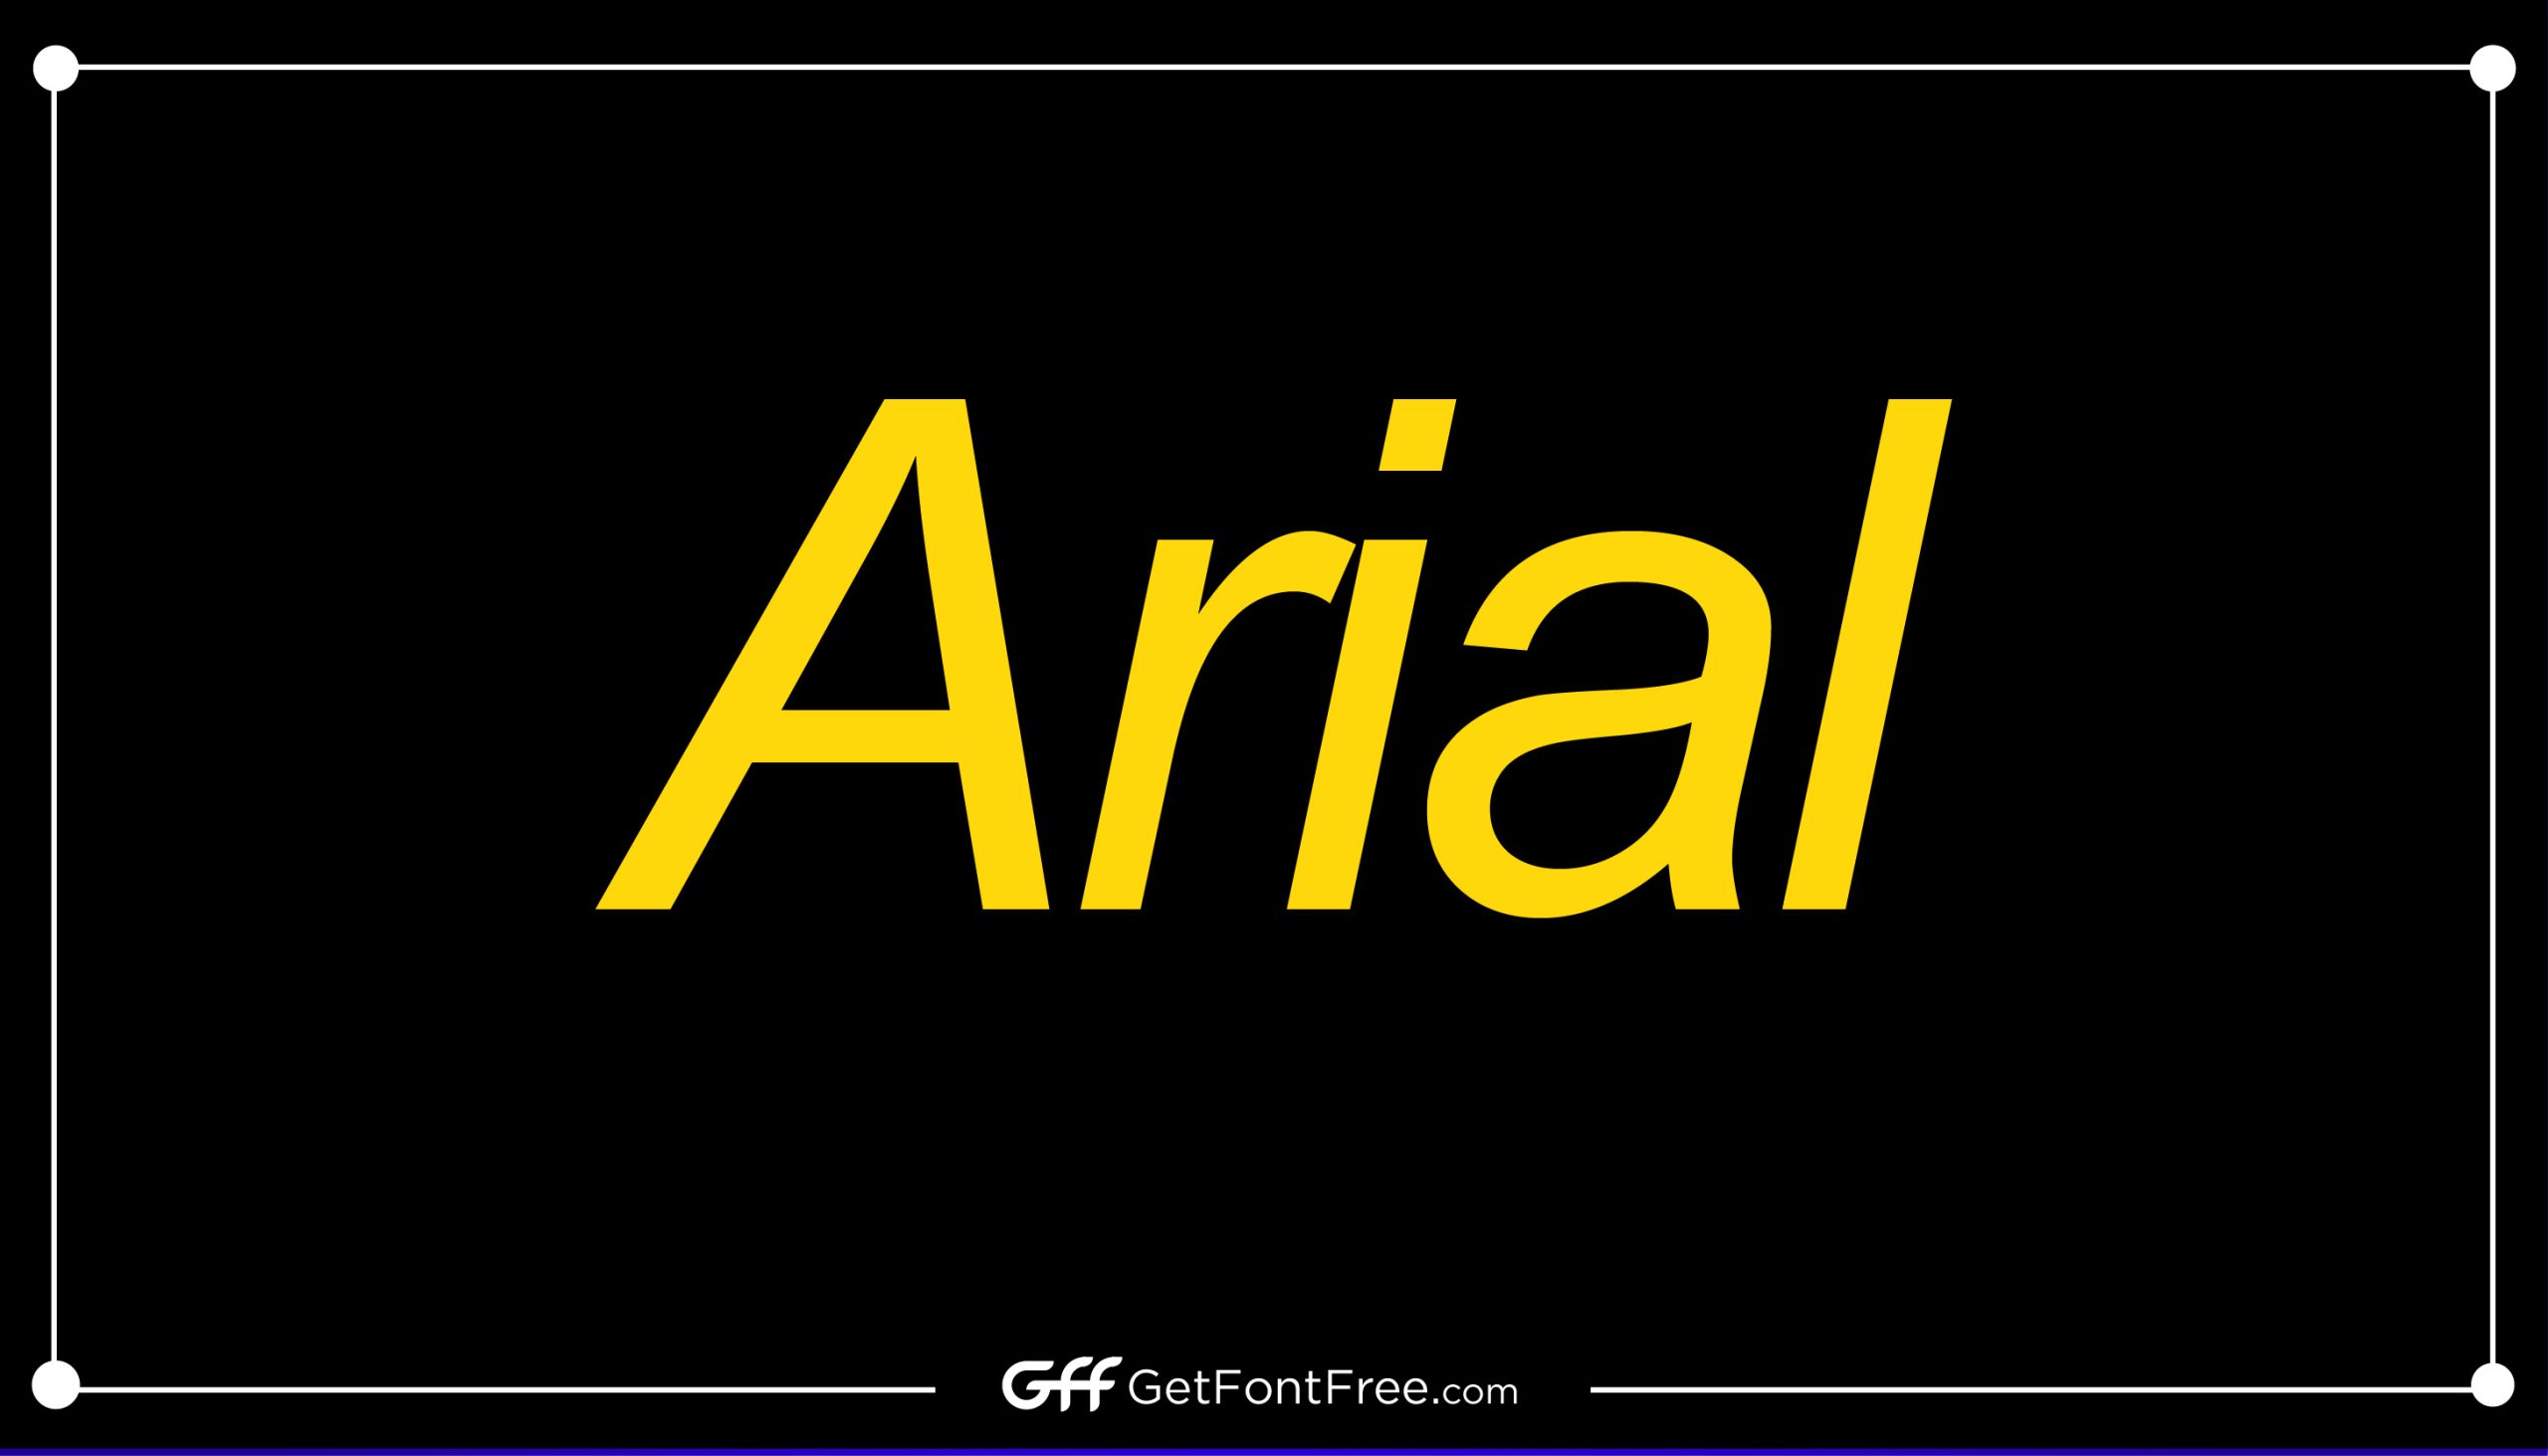 Arial Font is a widely used sans-serif typeface that was designed by Robin Nicholas and Patricia Saunders in 1982. It was created for IBM's laser printers and was initially known as Sonoran Sans Serif. The font's design is influenced by Helvetica, a popular Swiss sans-serif typeface. In 1989, Microsoft licensed Arial as a core font for Windows, and it quickly became a popular choice for both digital and print media.